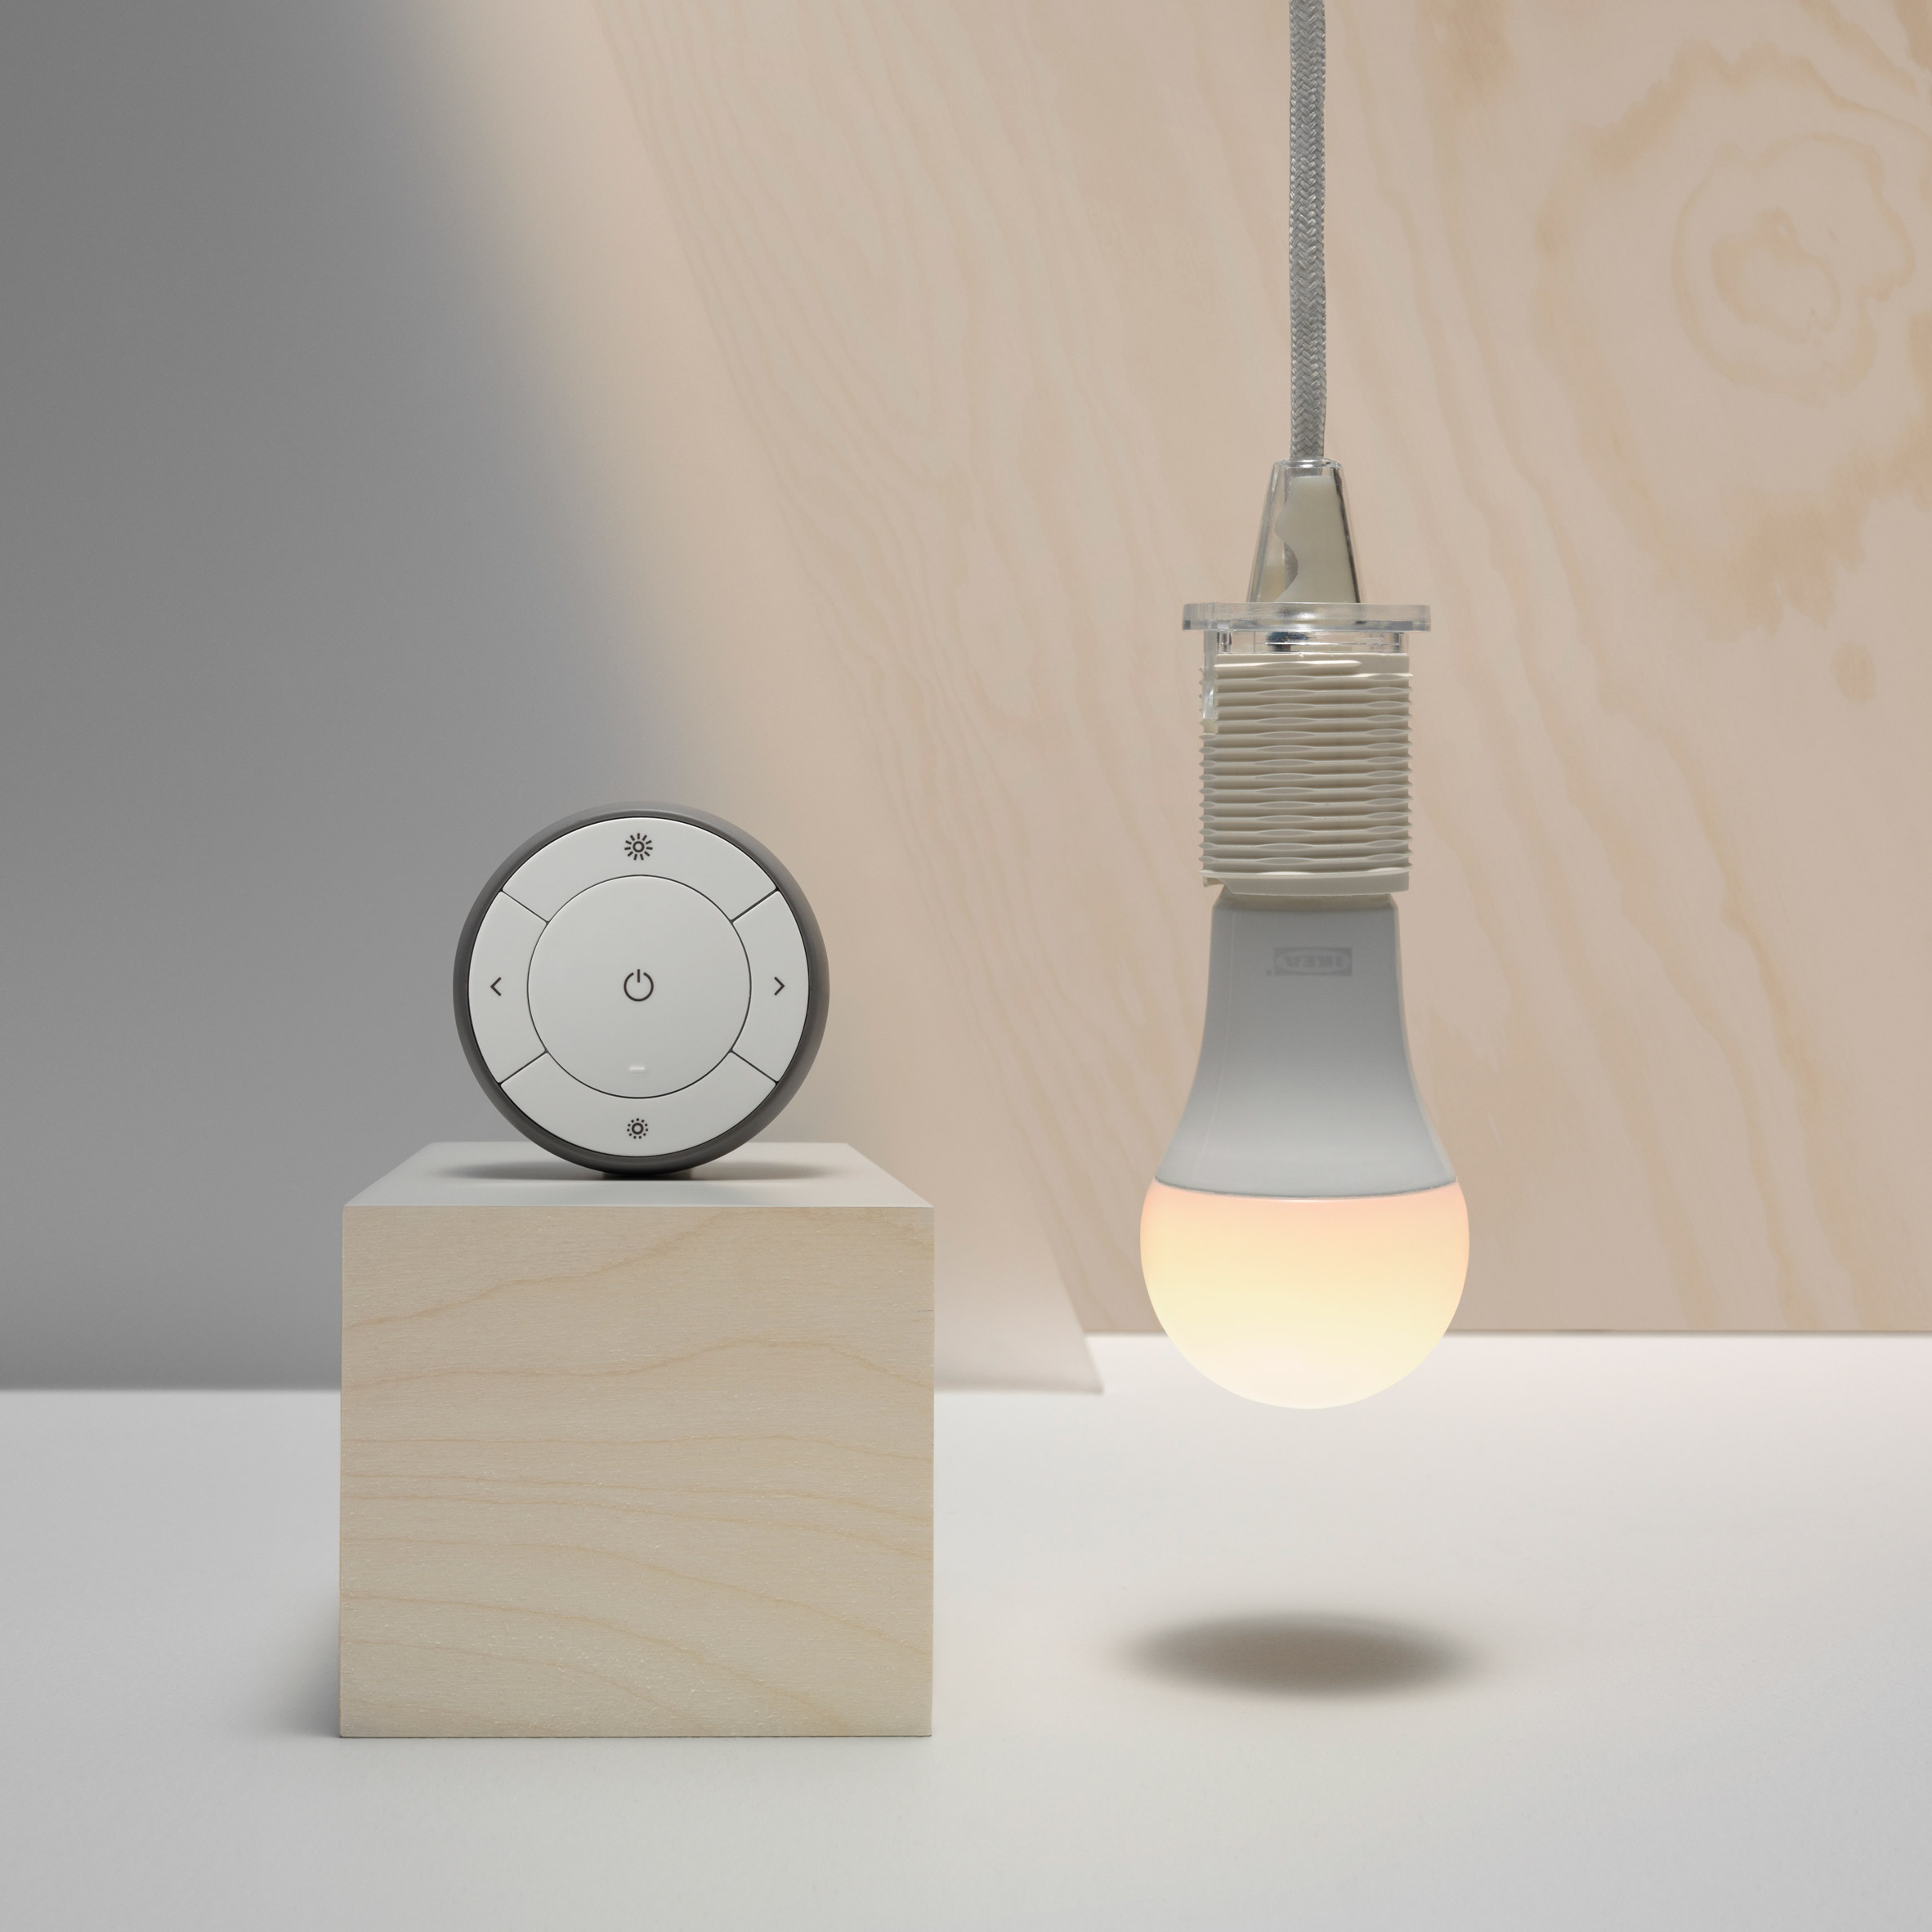 ventures into smart home with Trådfri lighting